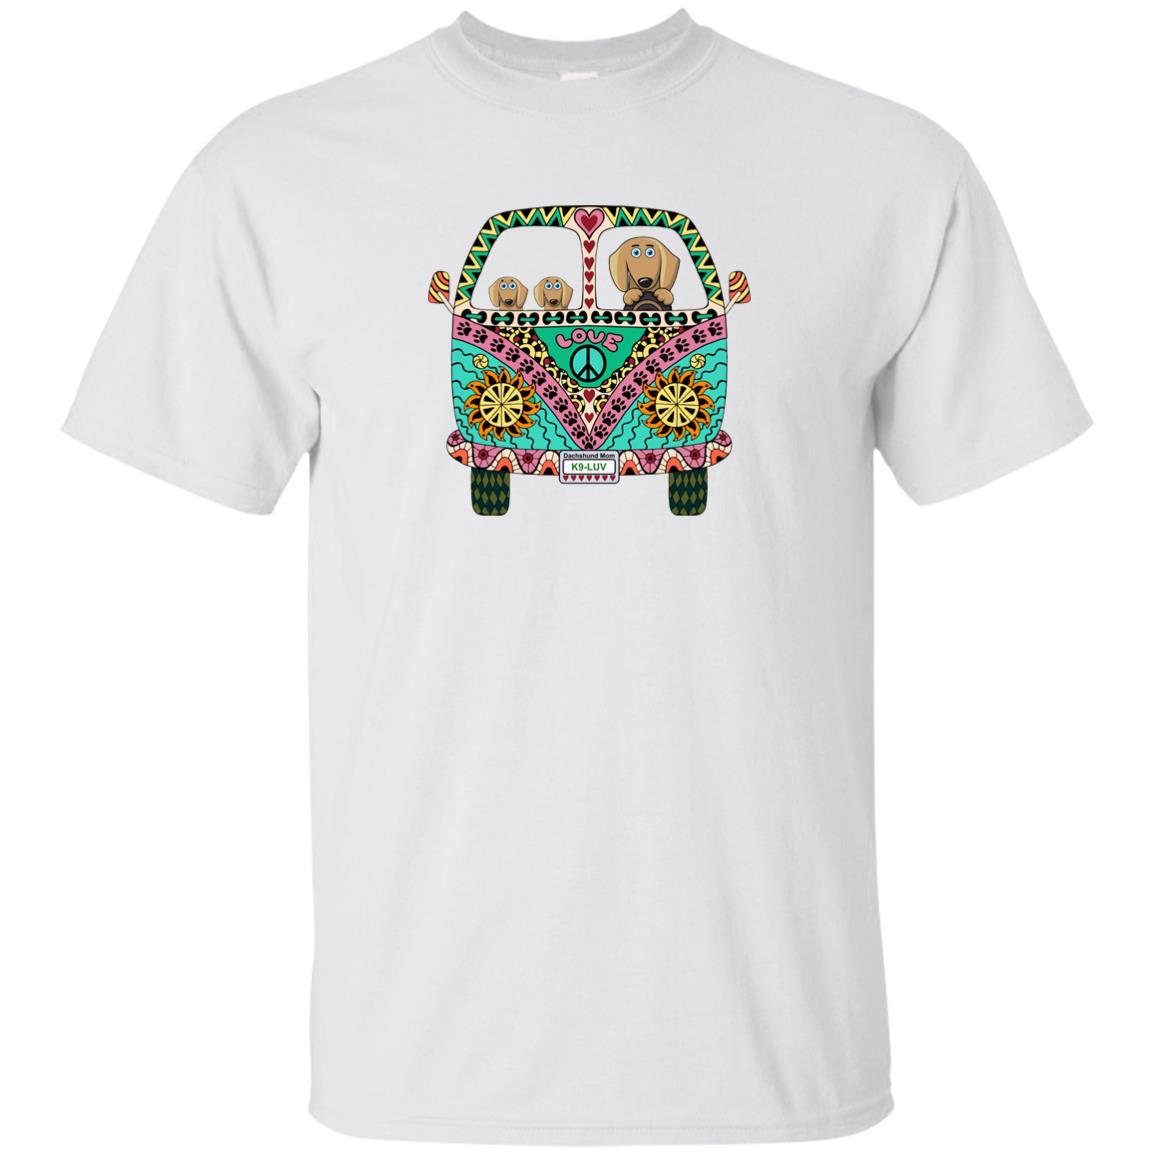 Dachshunds Love Bus Brown Dogs T-Shirts